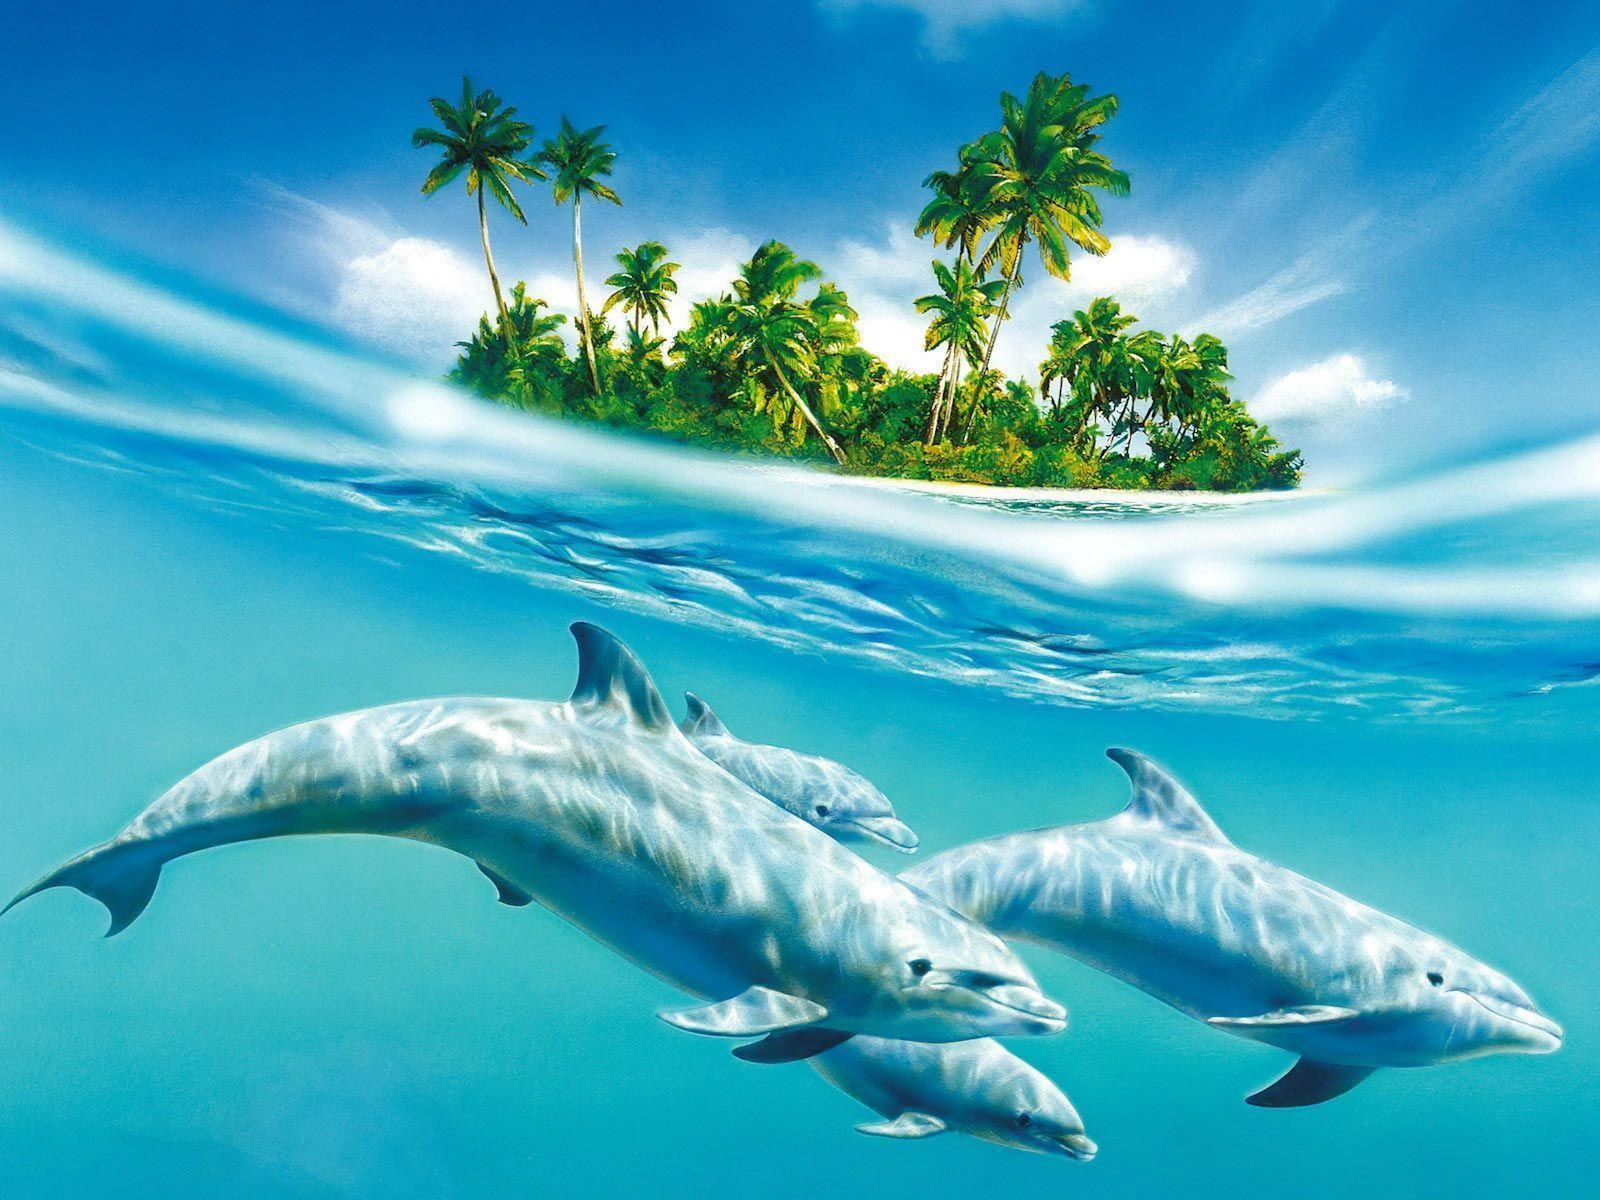 Download HD Blue Dolphins Wallpaper. High Quality Wallpaper